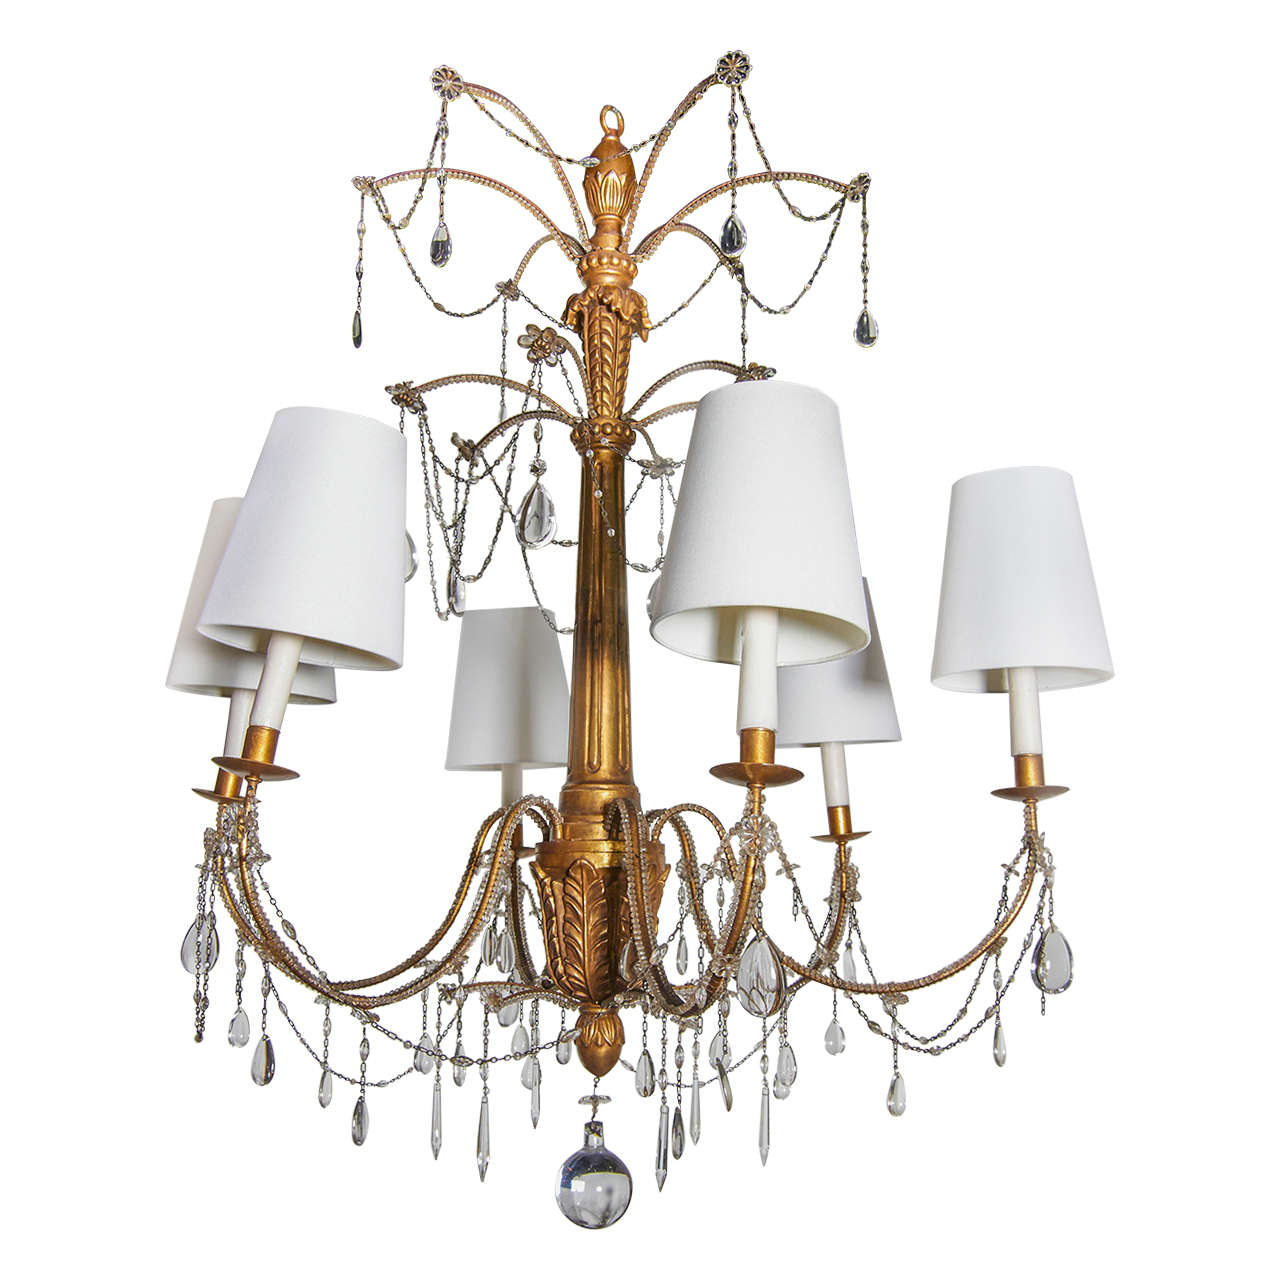 Outstanding Hollywood Regency Large-Scale Chandelier with Cut Crystal Pendants